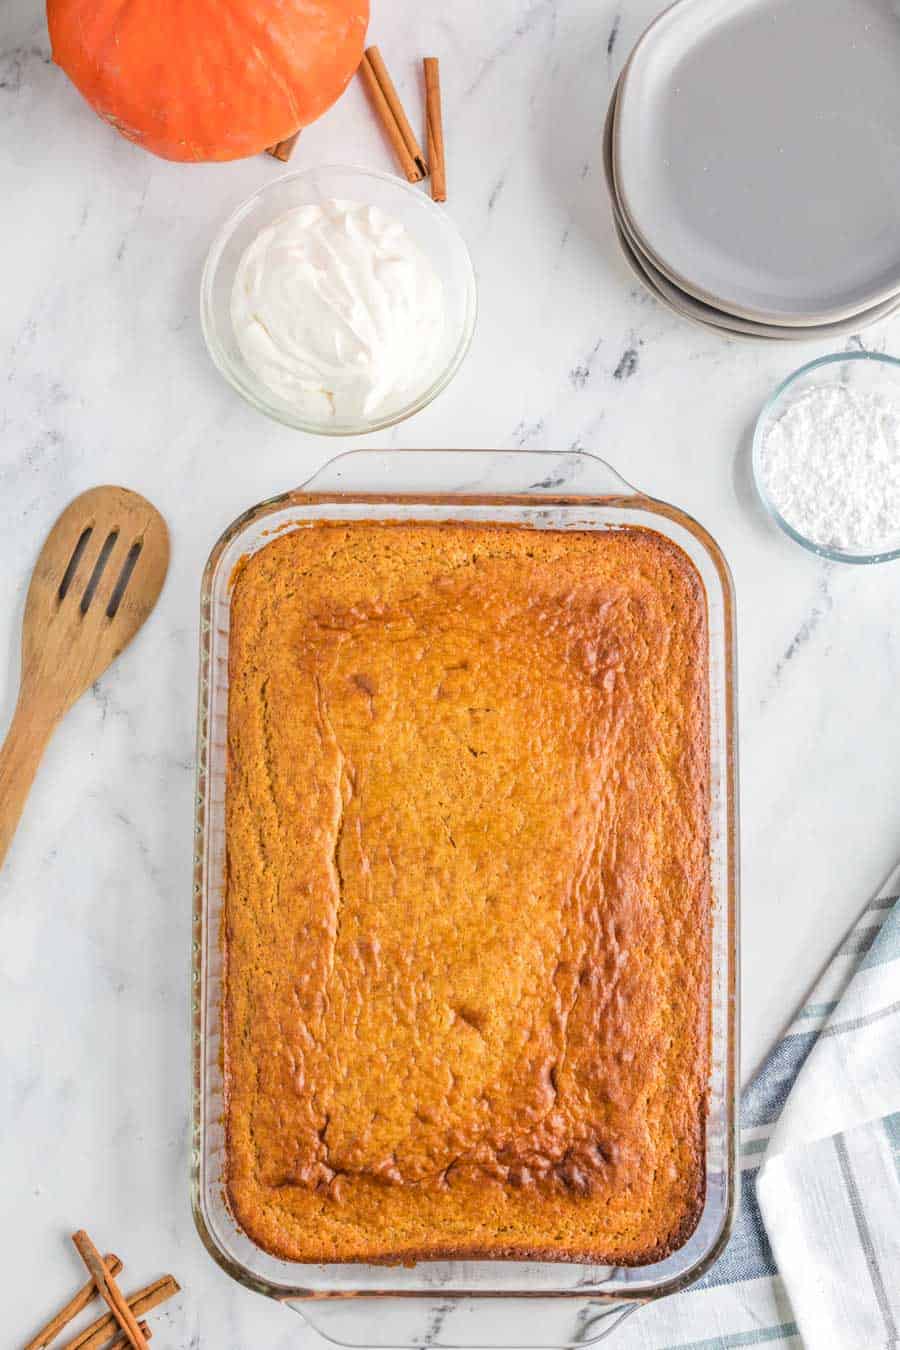 the cake pan with the finish bake of the extra thick pumpkin cake